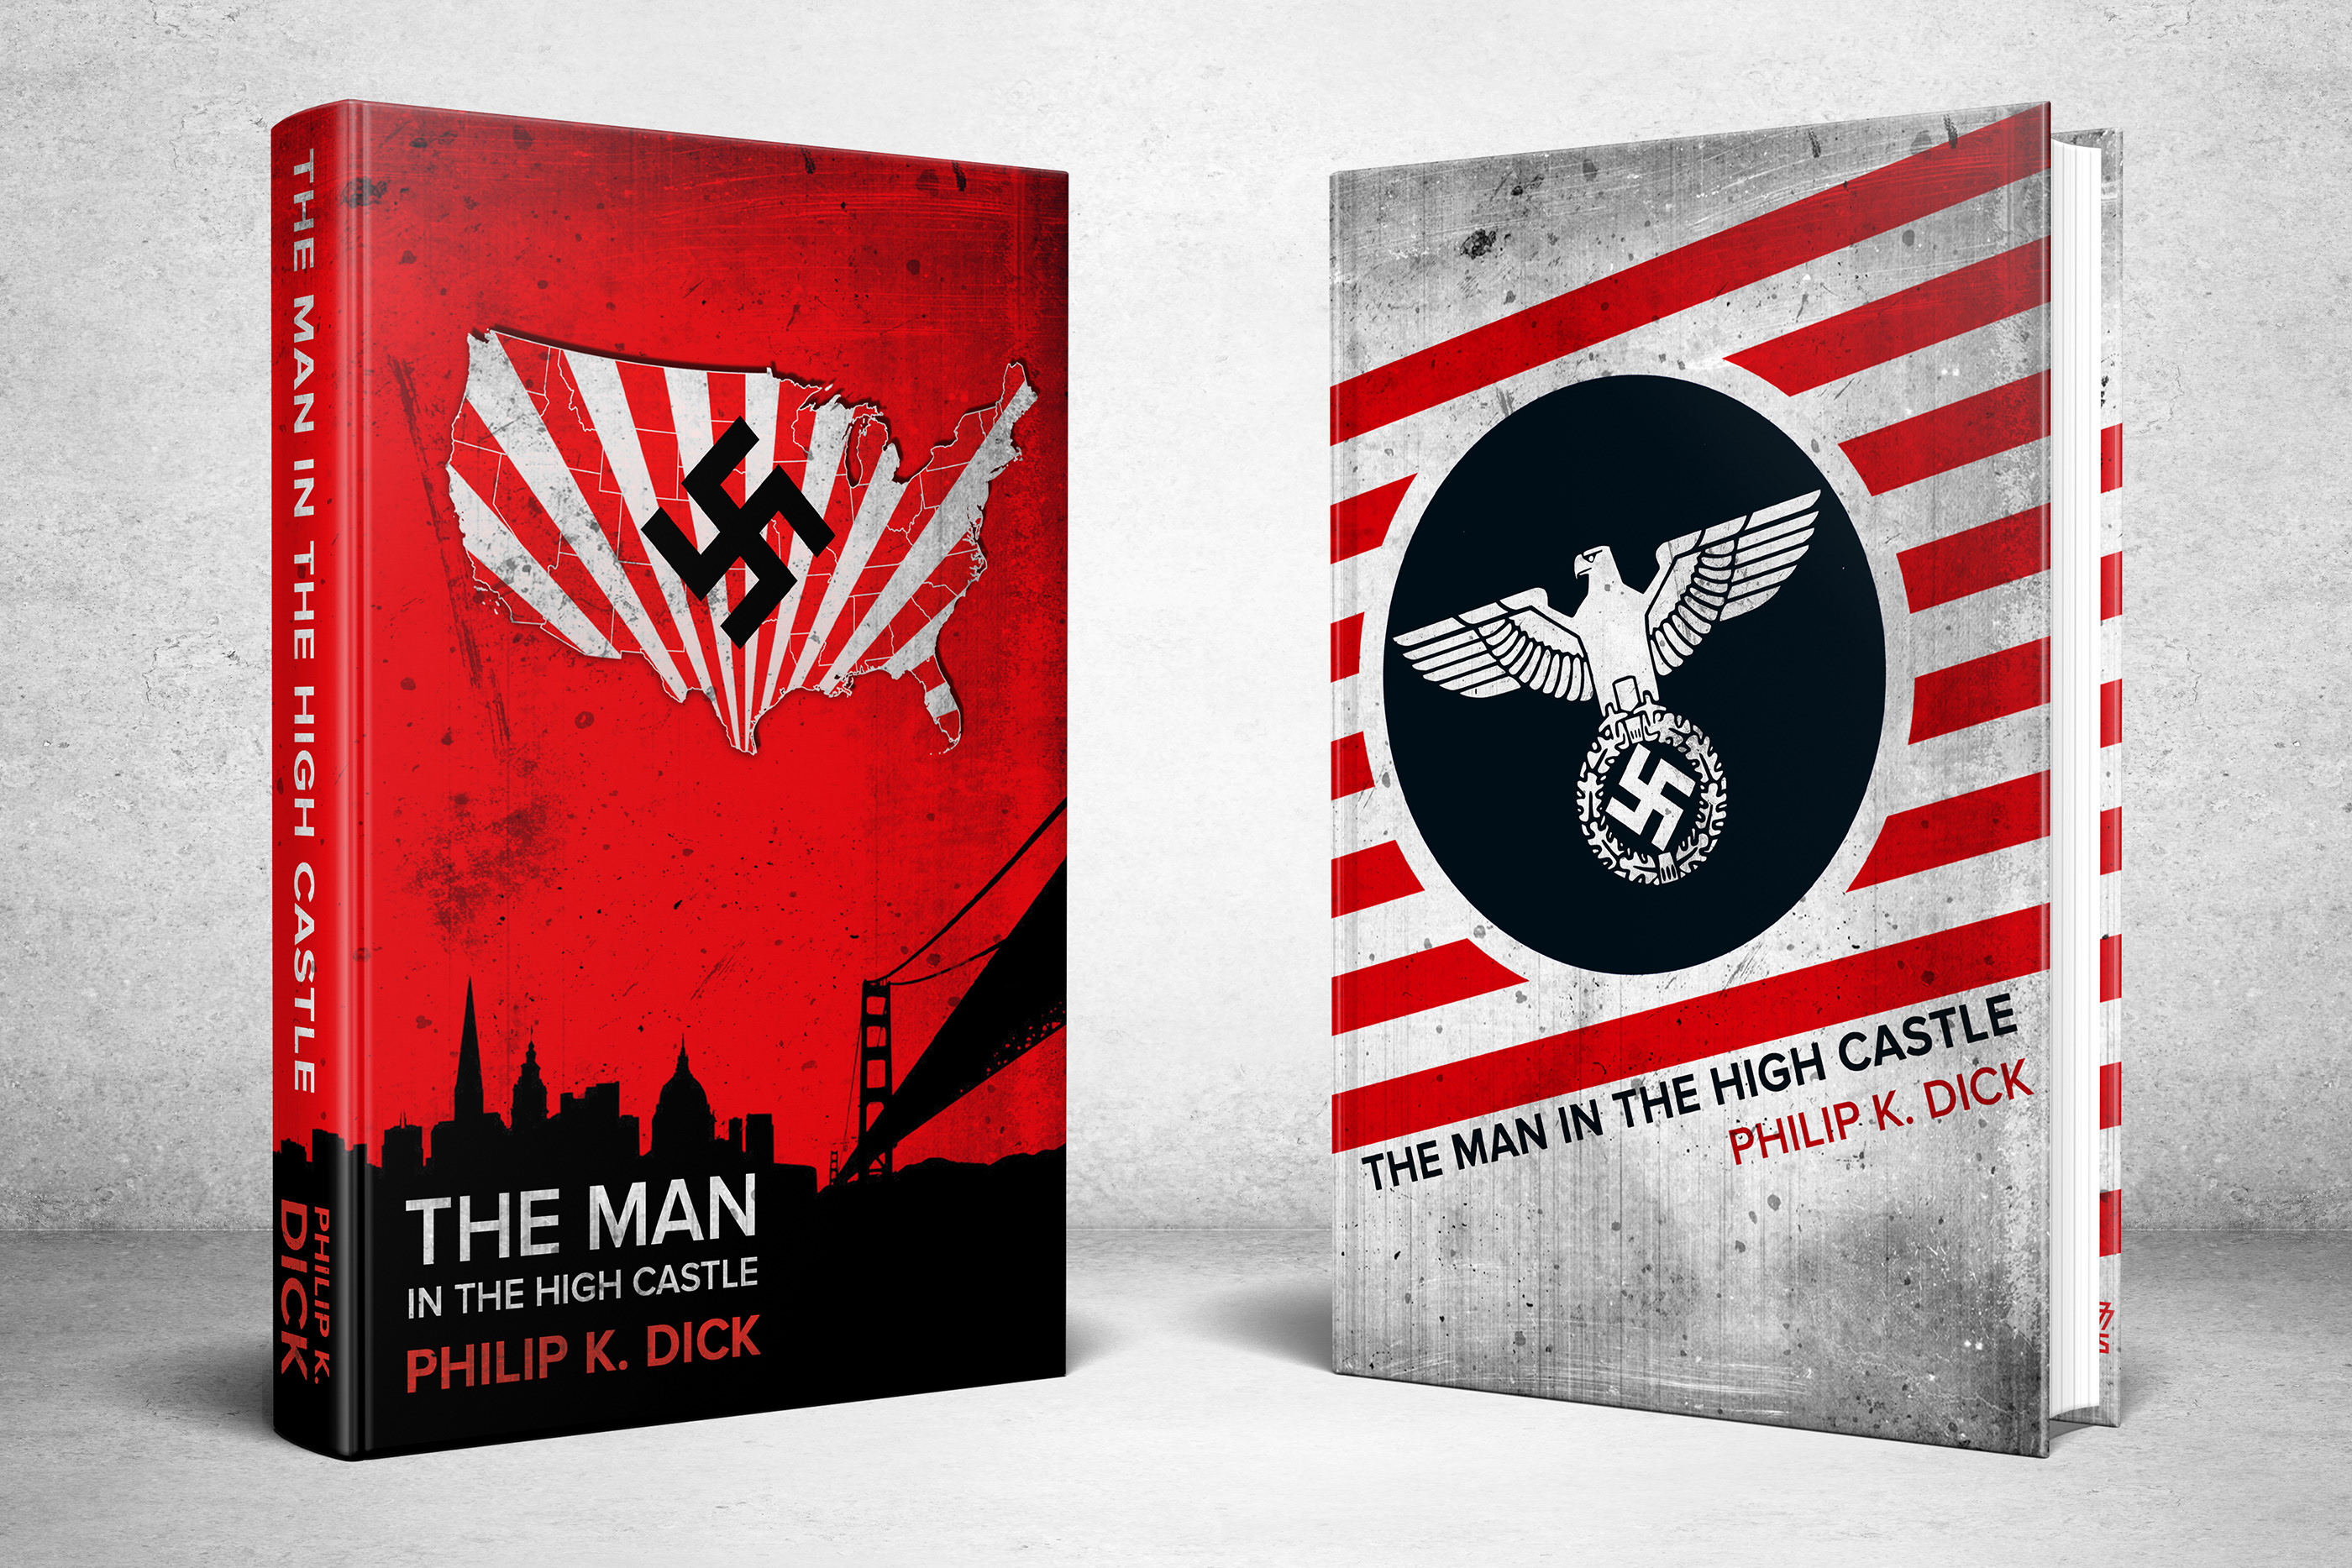 Philip K. Dick: "The Man in the High Castle" book cover on Behance